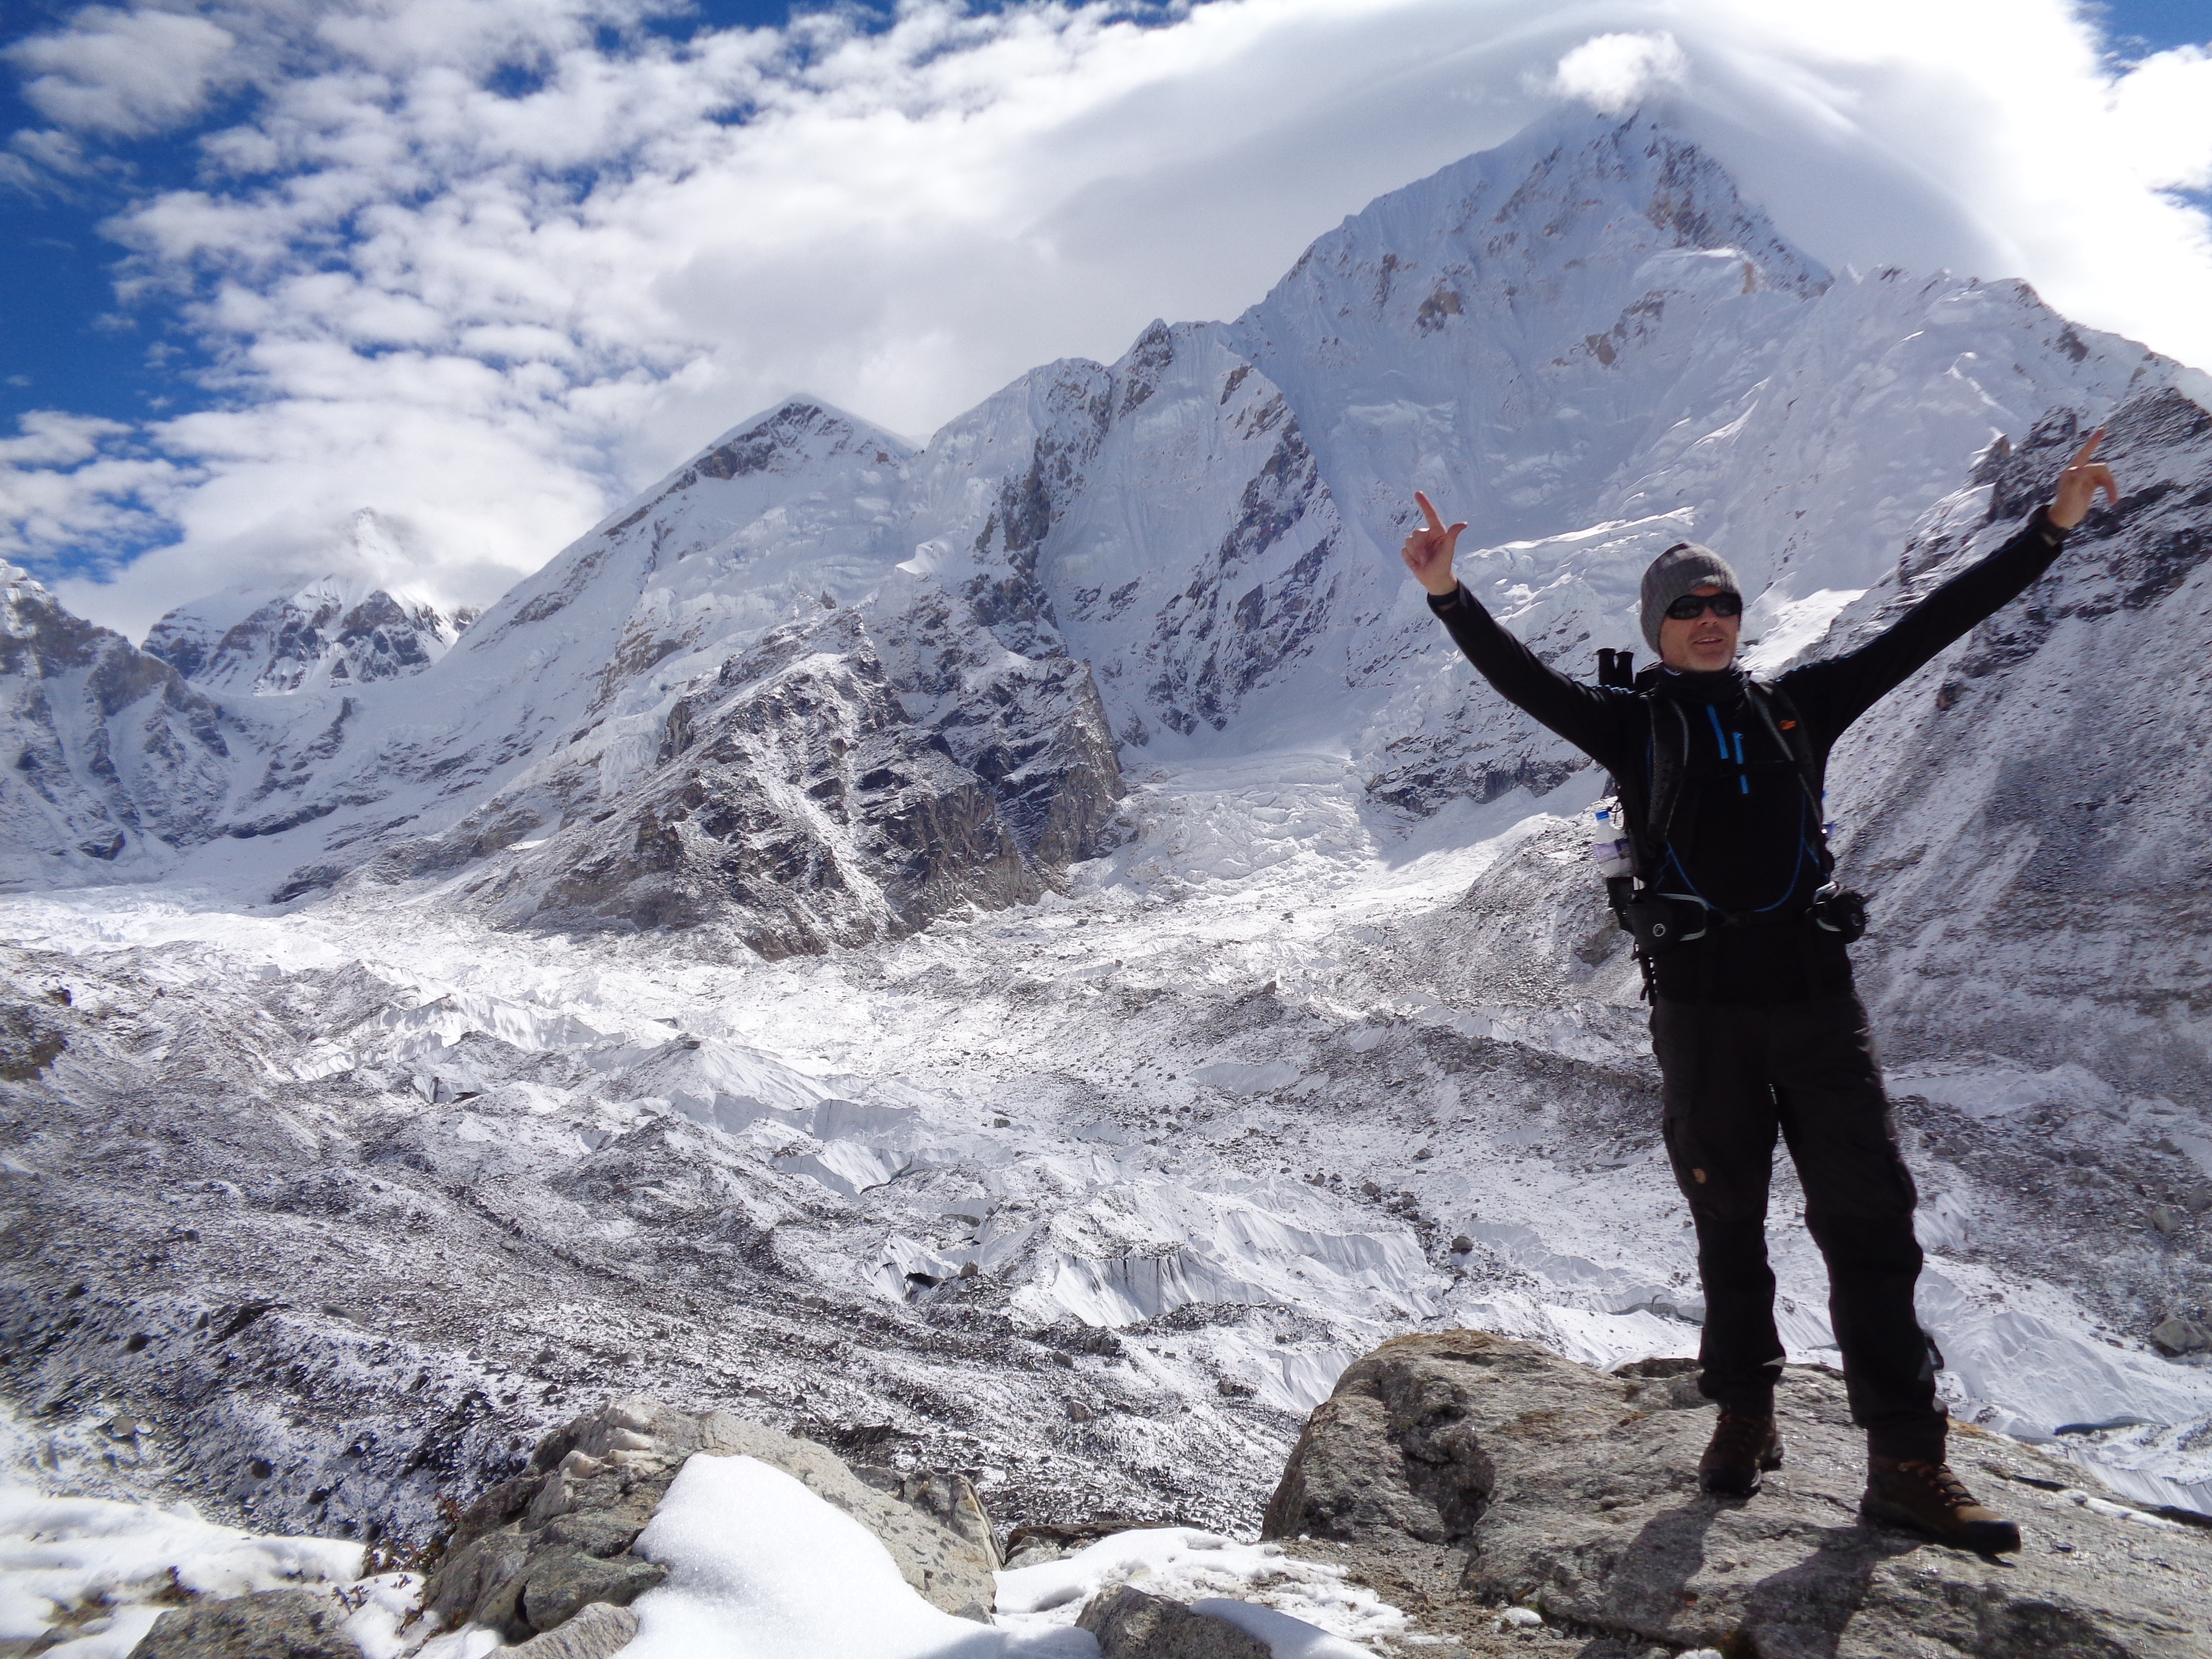 Trekking to Everest Base Camp in February or March